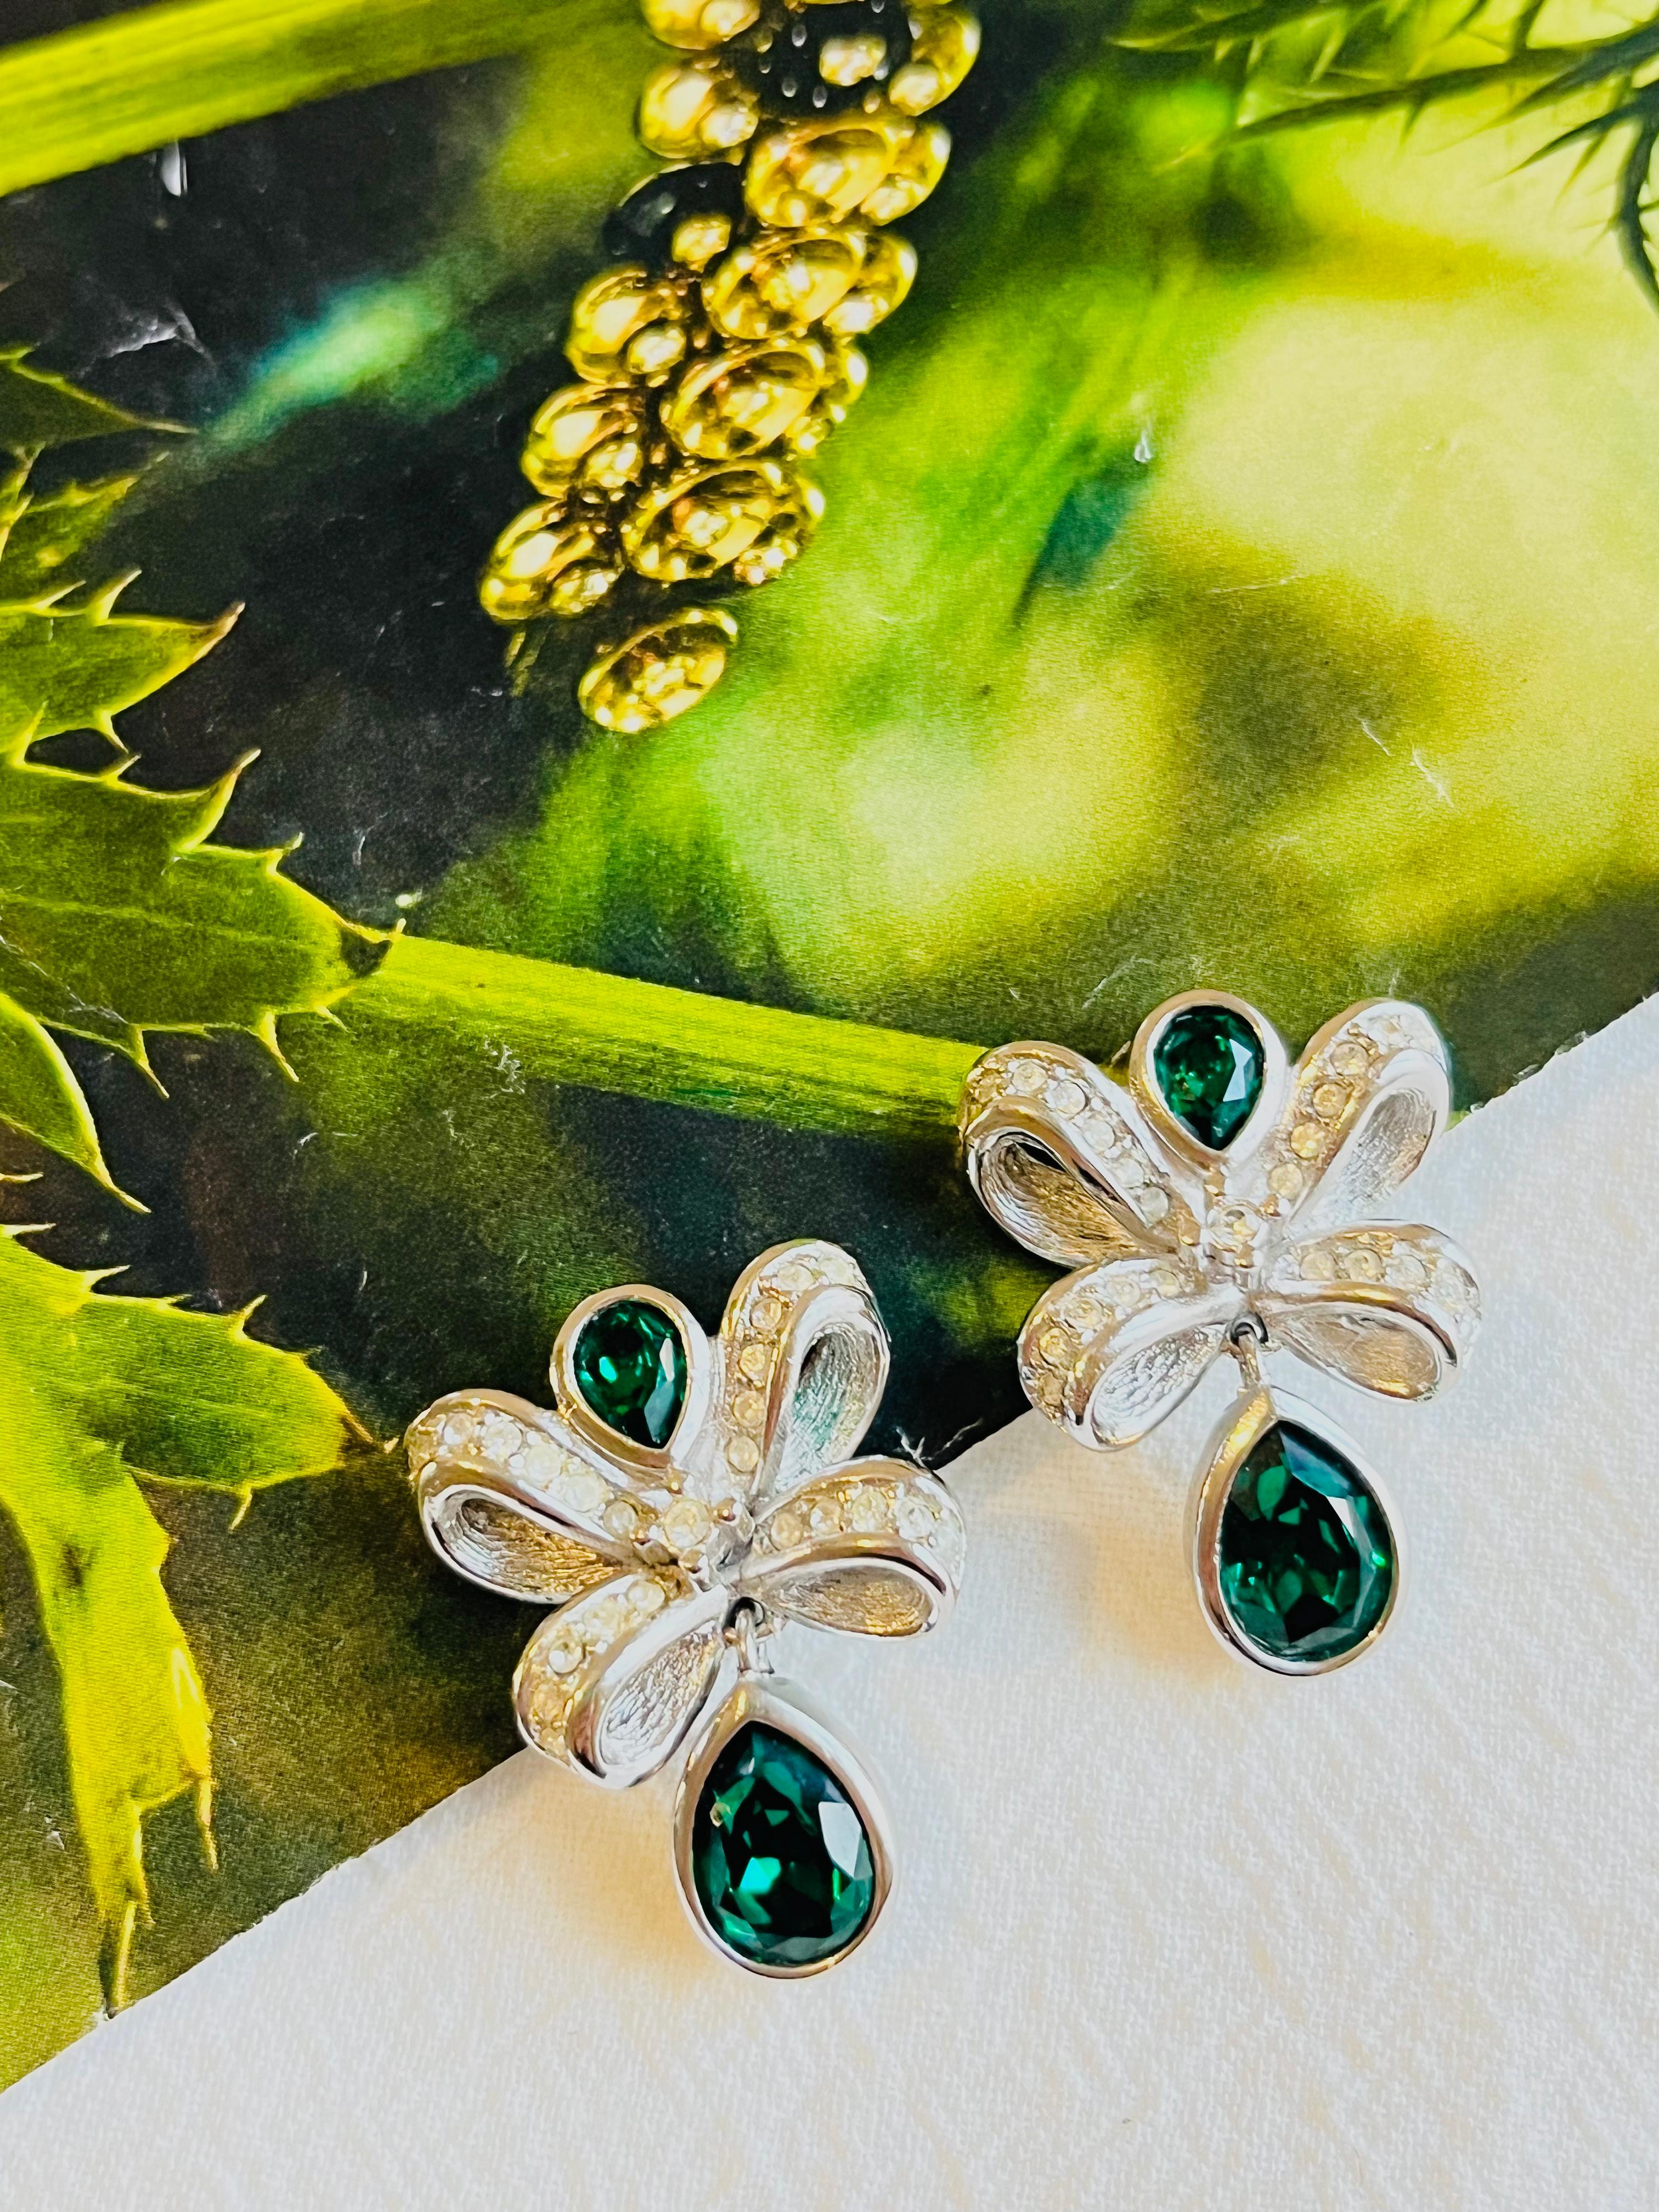 Christian Dior Vintage 1980s Knot Bow Crystals Emerald Water Drop Clip Earrings, Silver Tone

Very good condition. 100% genuine. Rare to find.

A very beautiful pair of clip on earrings by Chr. DIOR, signed at the back.

Material: Silver plated